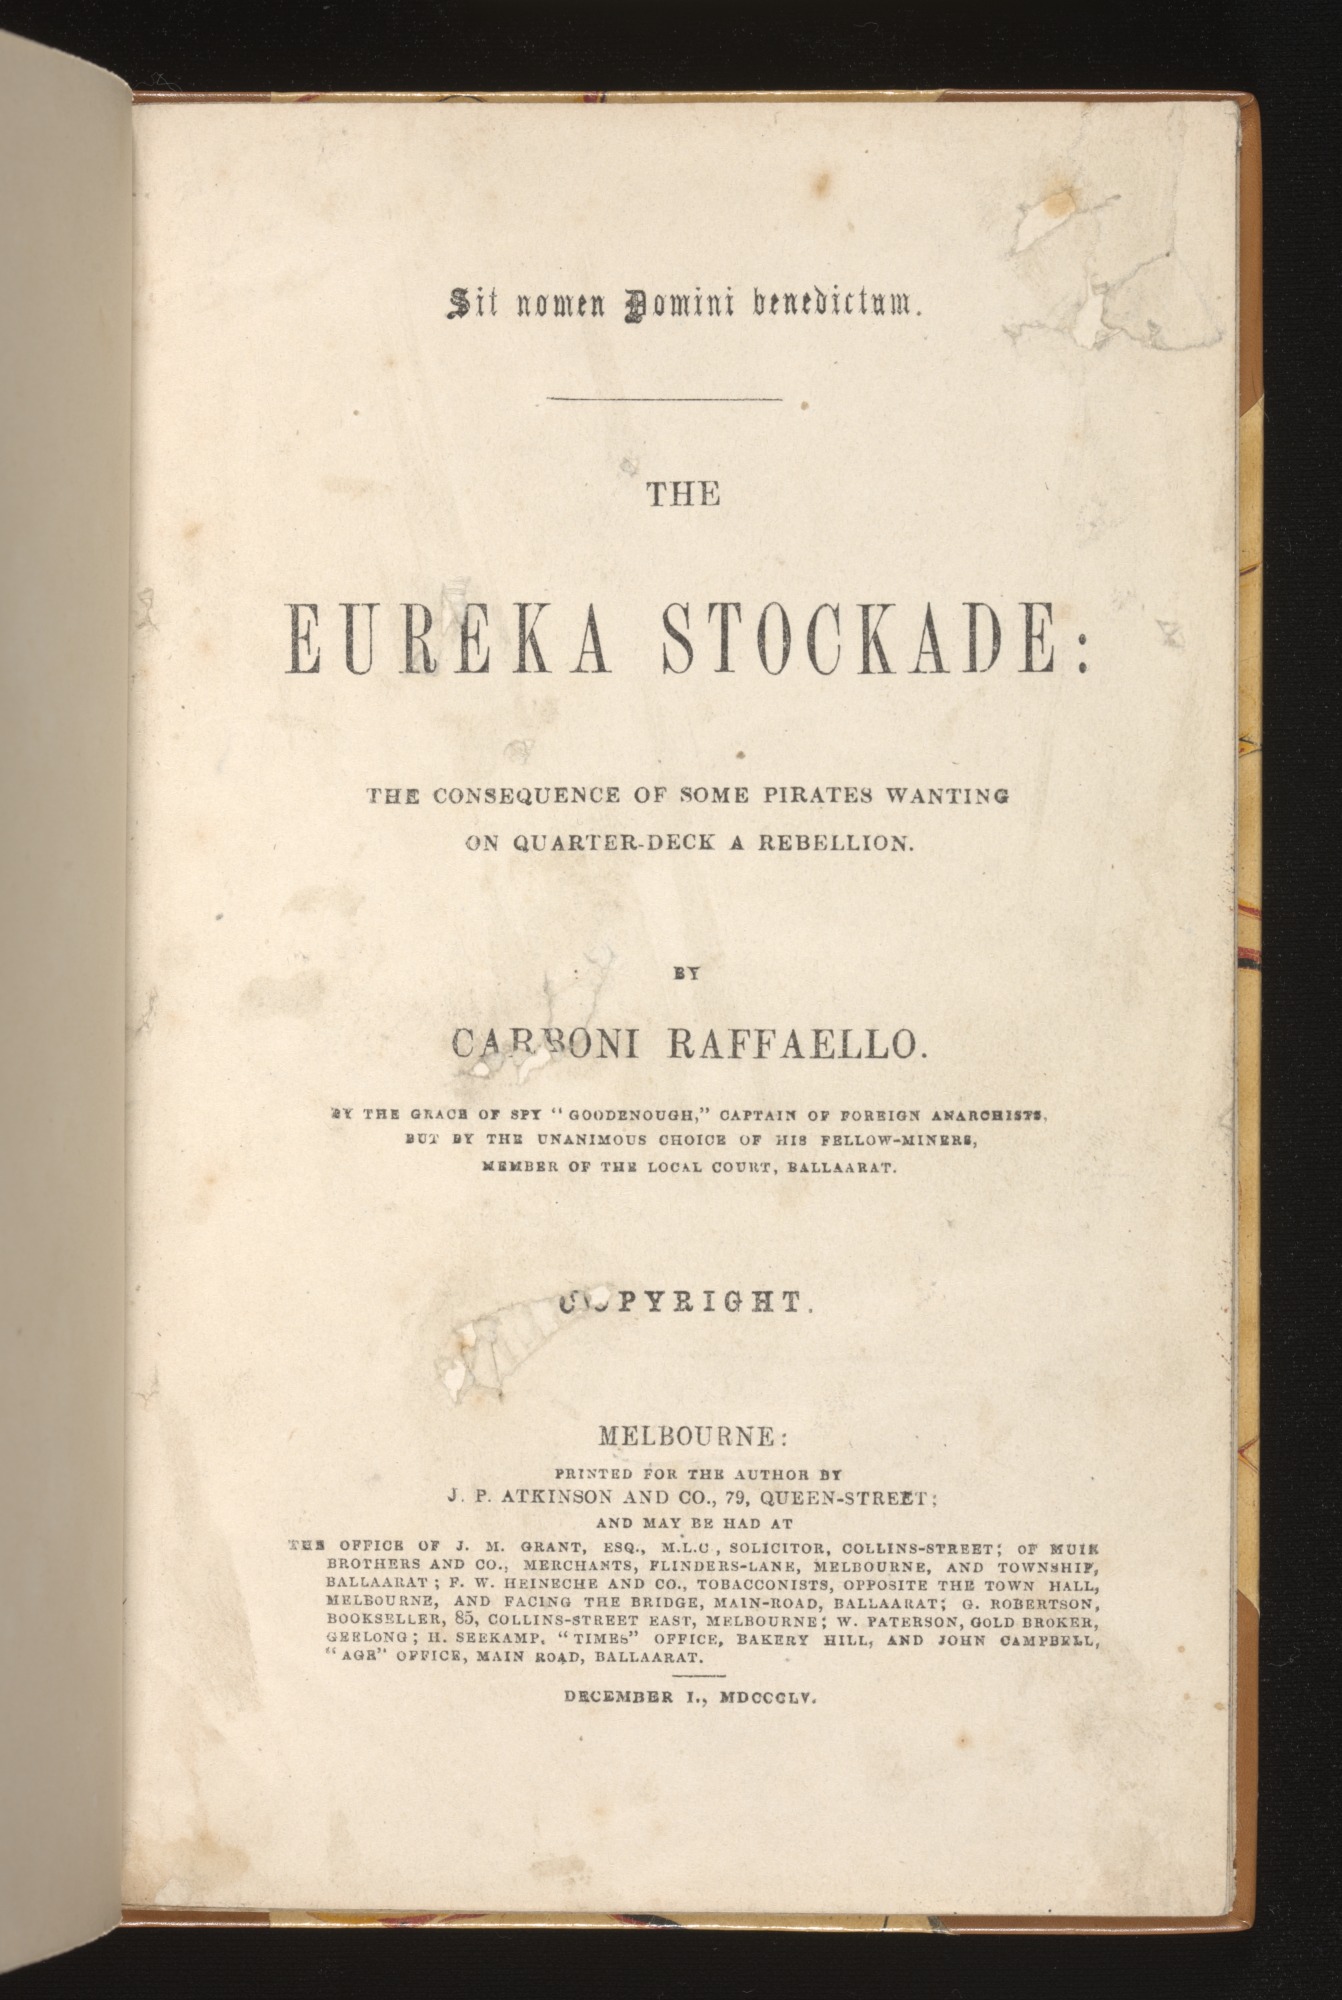  Title page of a book called The Eureka Stockade.